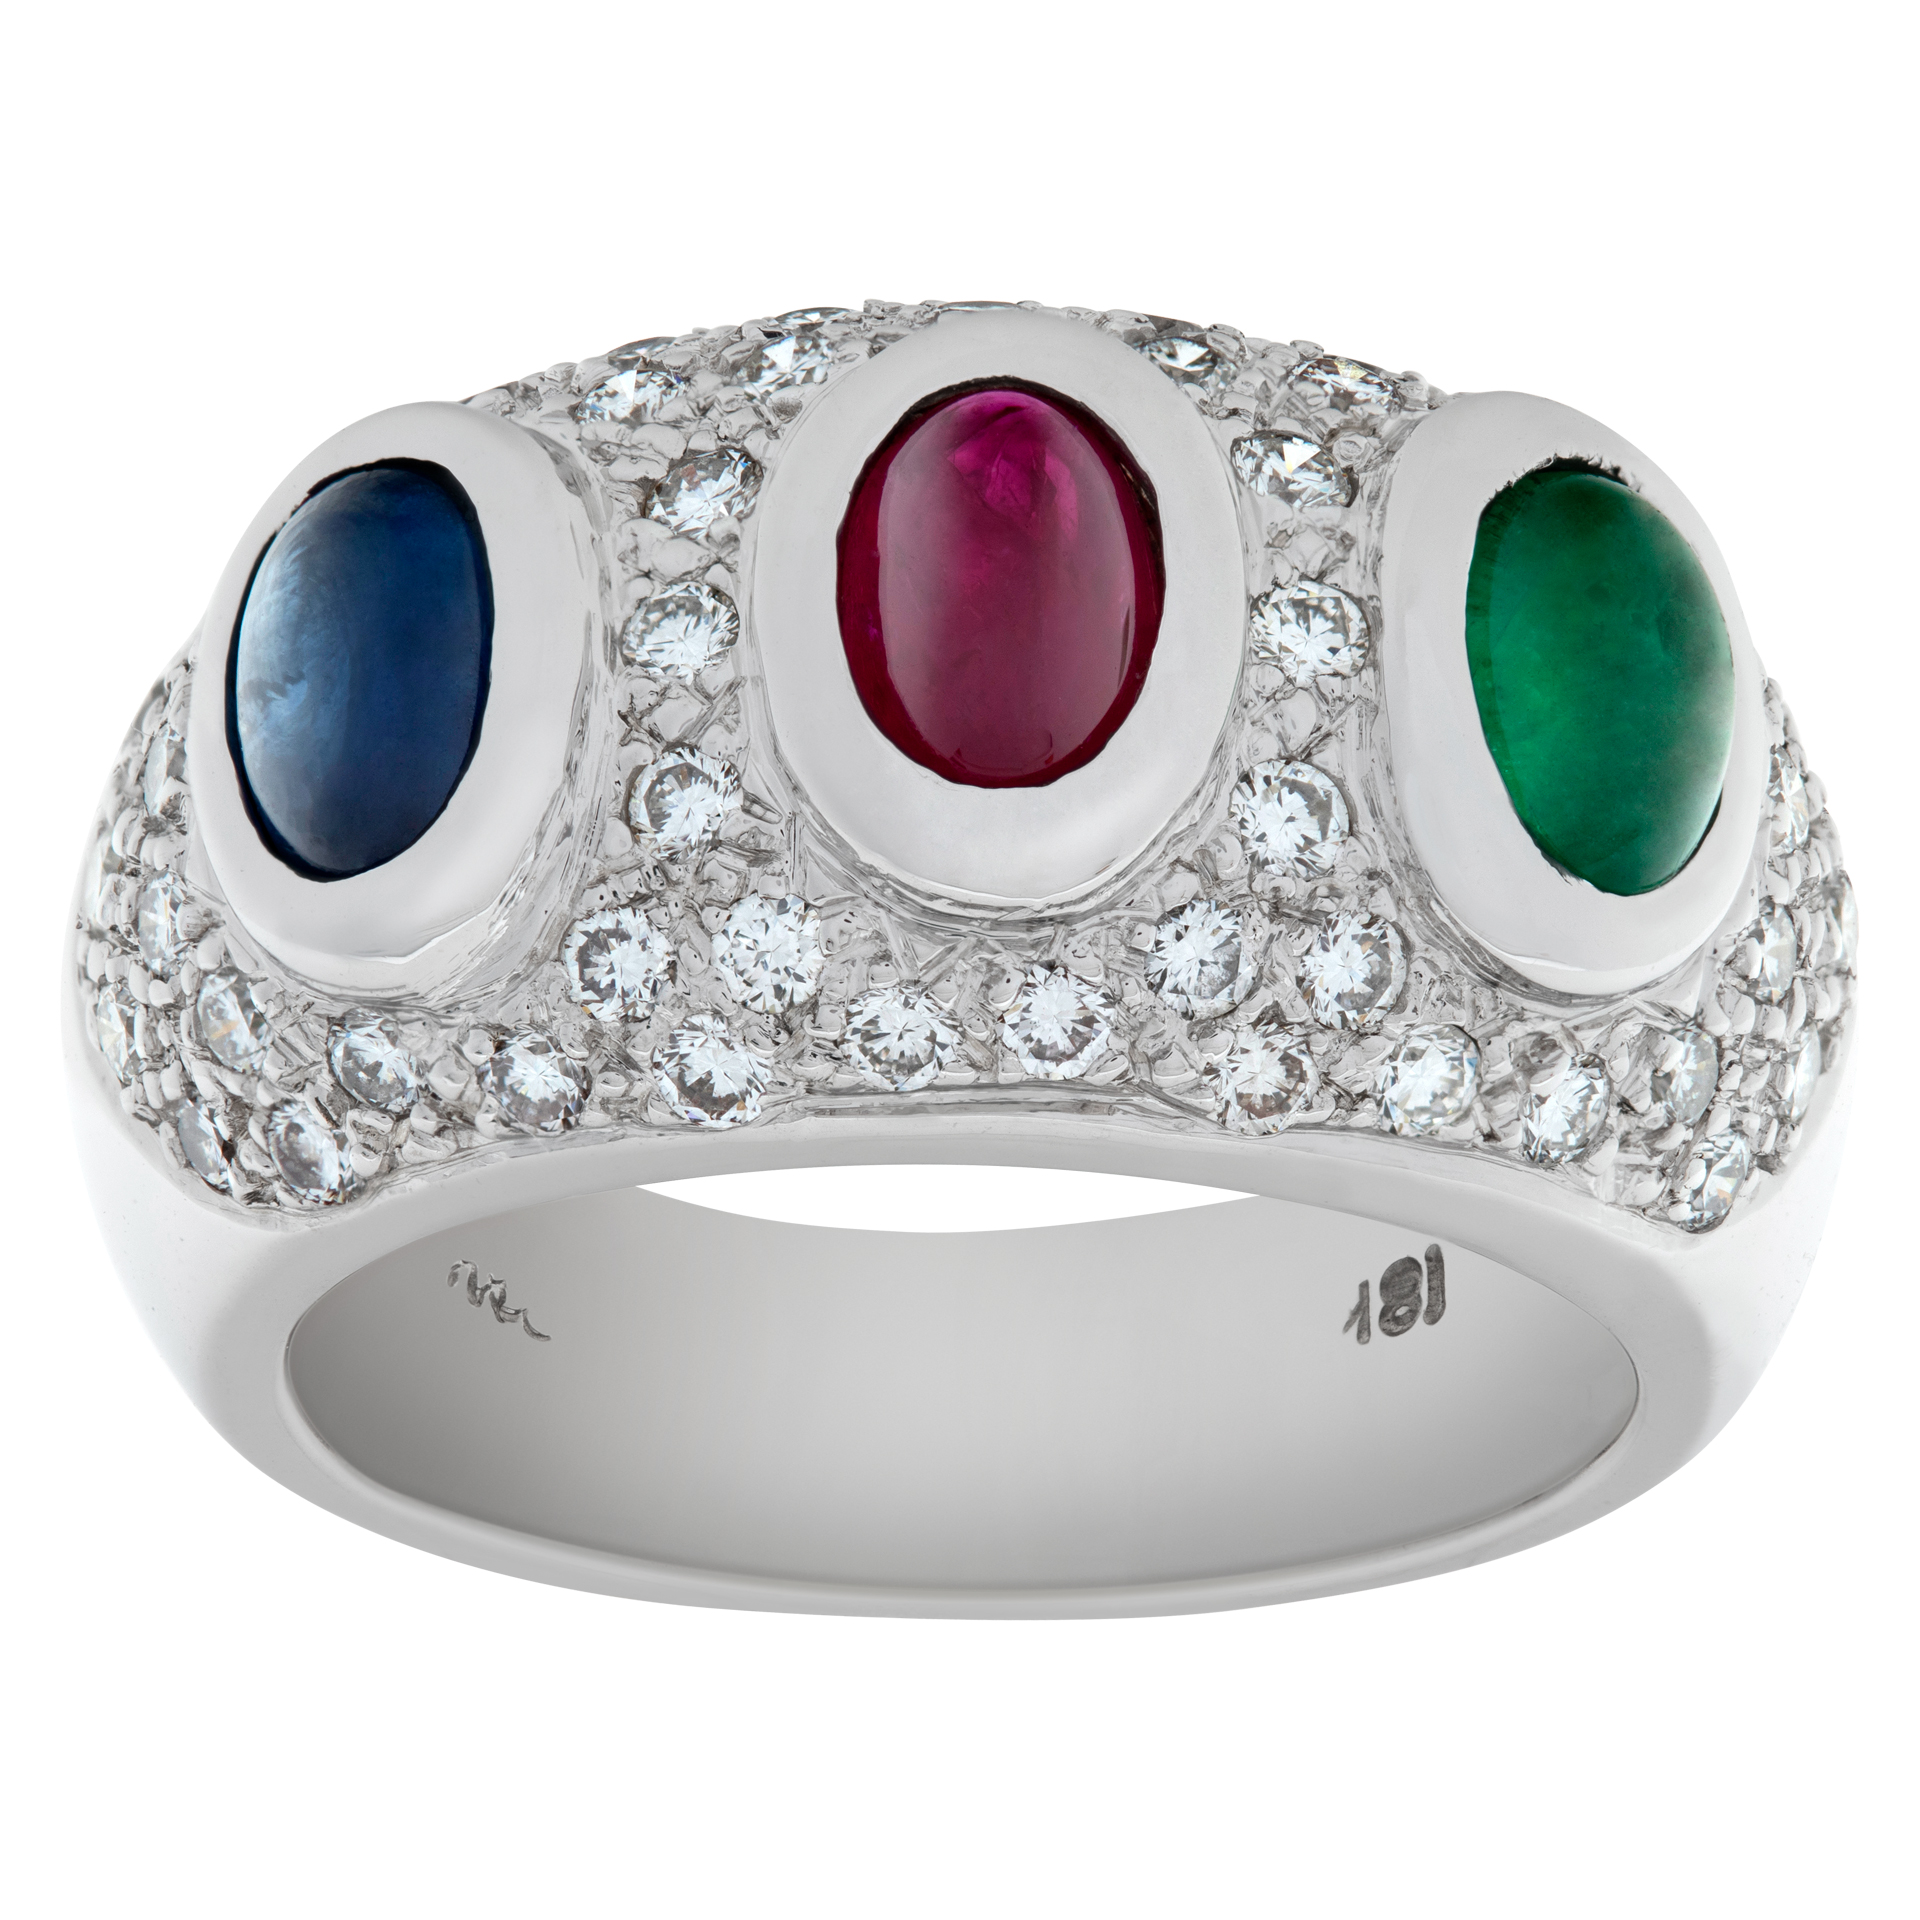 Pave diamond ring with cabochon sapphire ruby & emerald in 18k white gold image 1